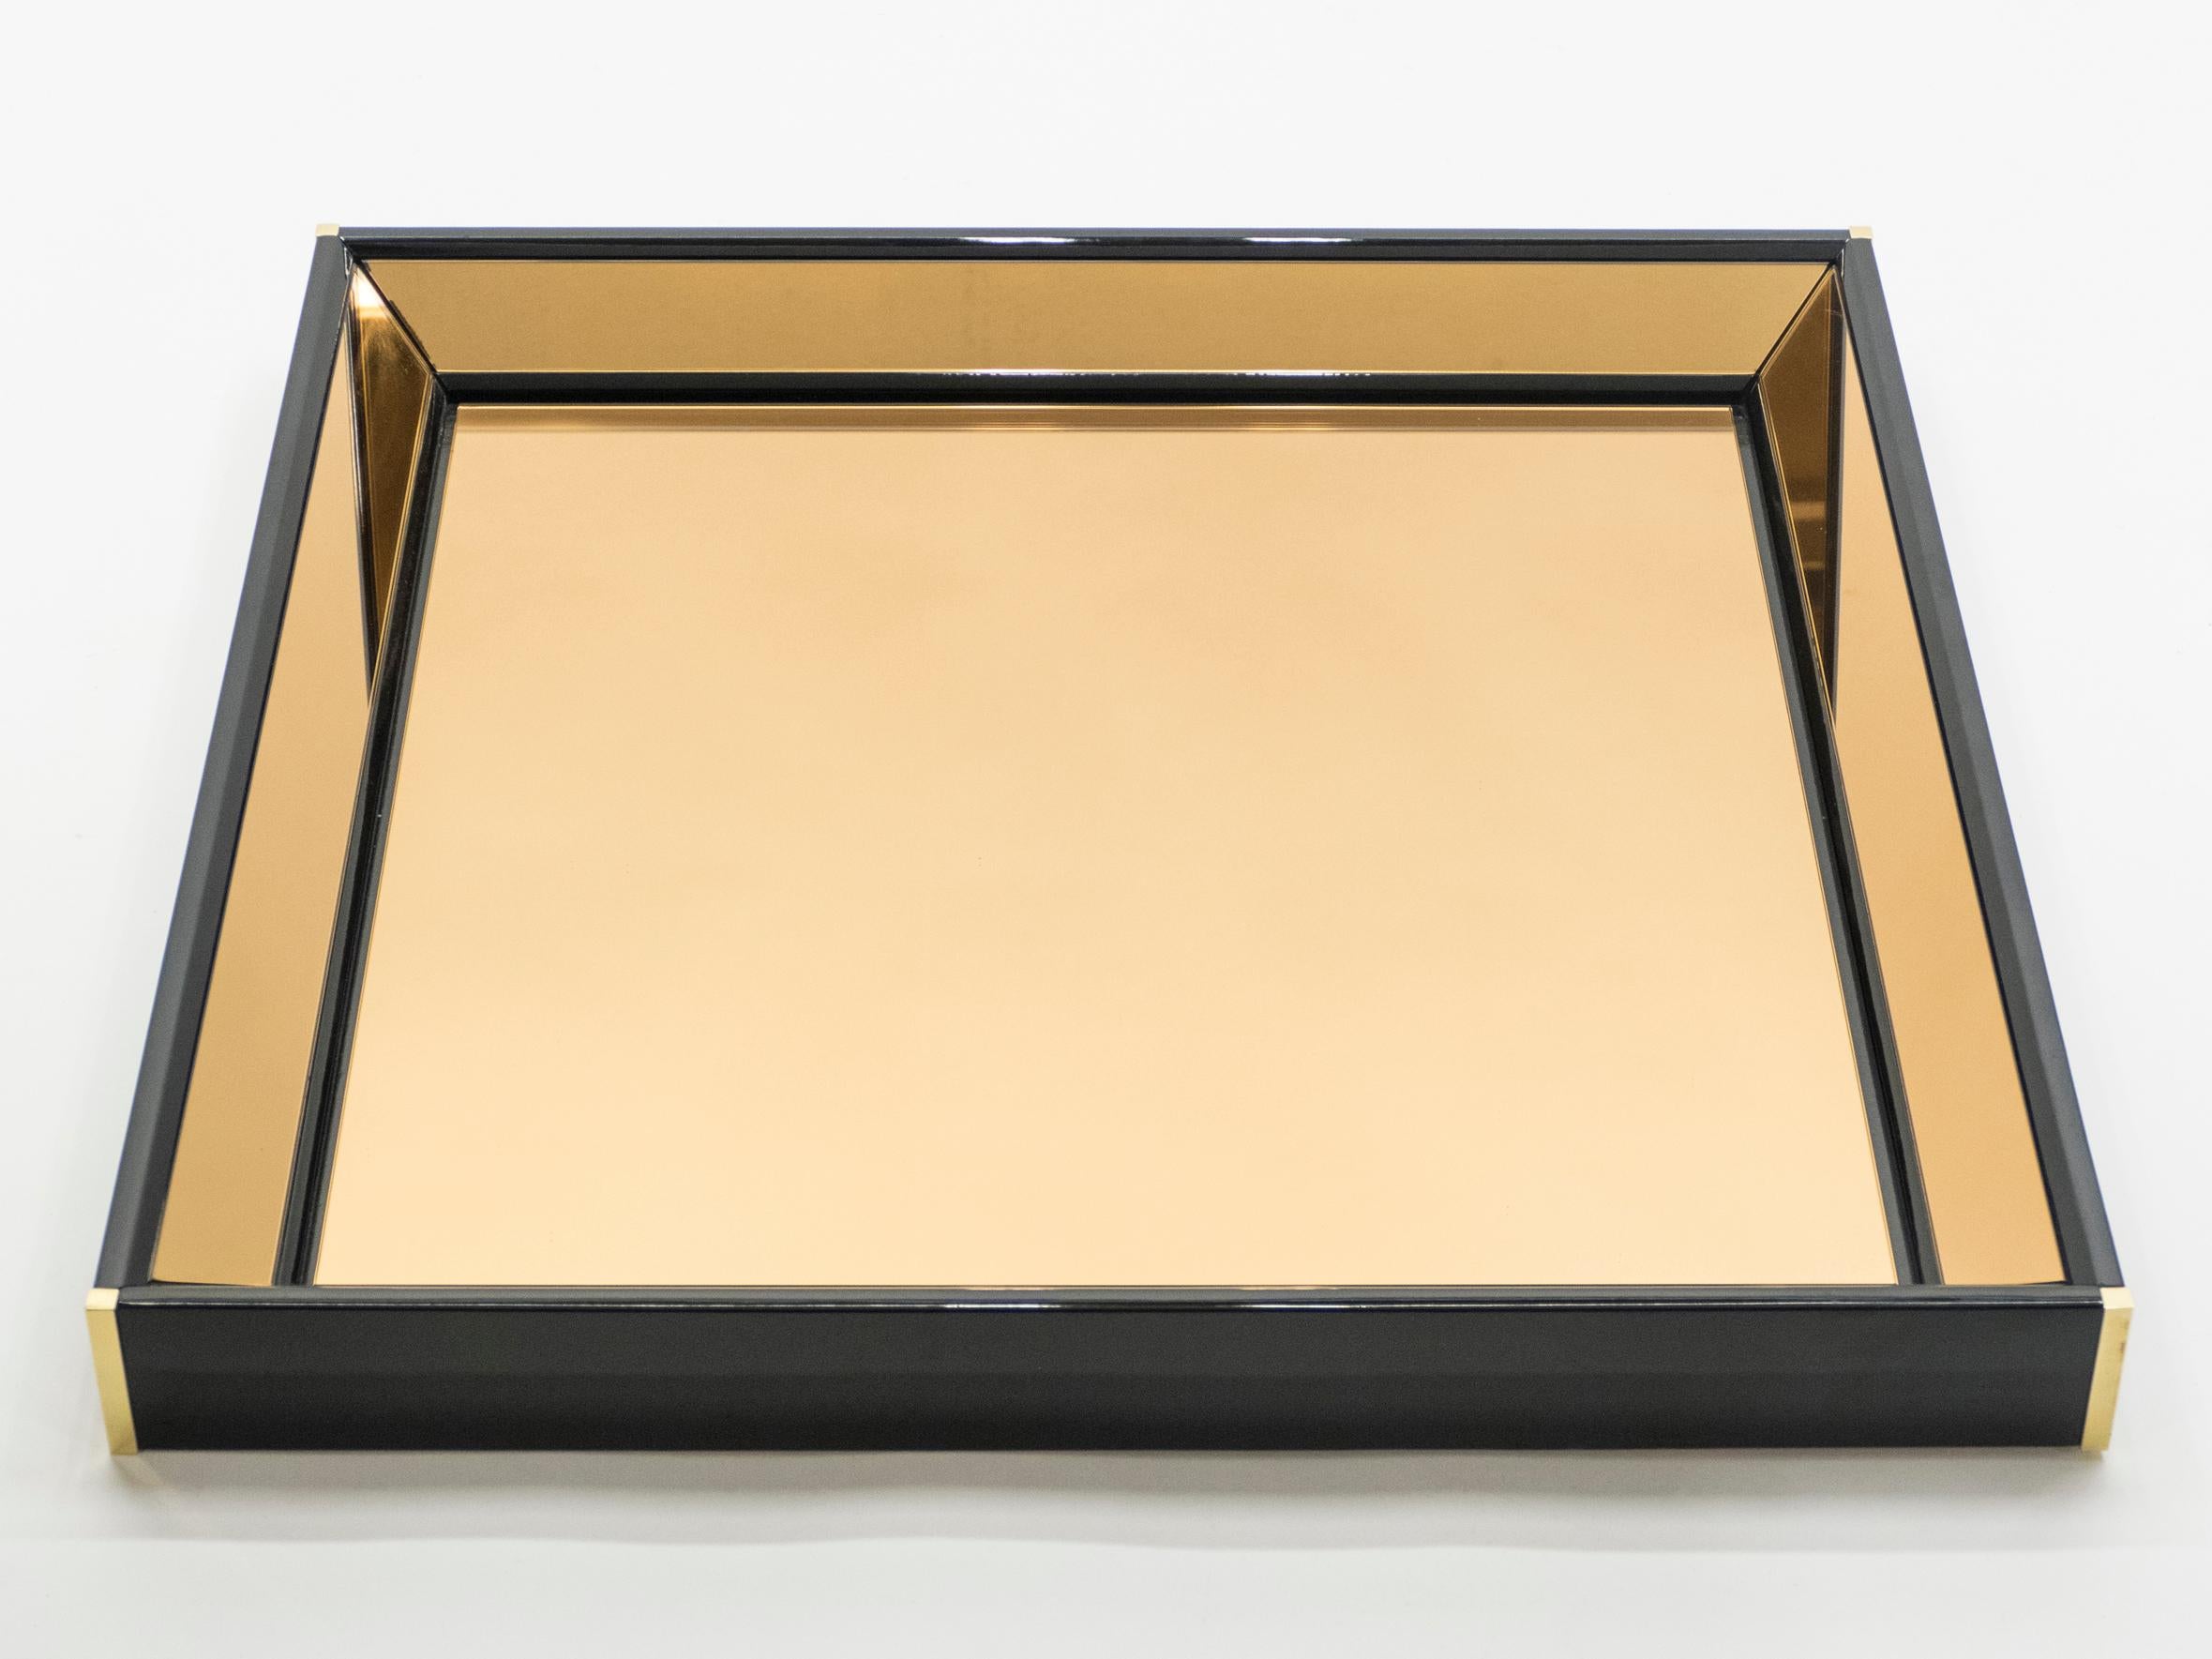 This Italian midcentury black lacquered mirror would be stunning in any room. The shiny black lacquer coating is the appropriate match to the bronze-tinted mirror frame, both reflecting light in a subdued way and creating a chic color palette.